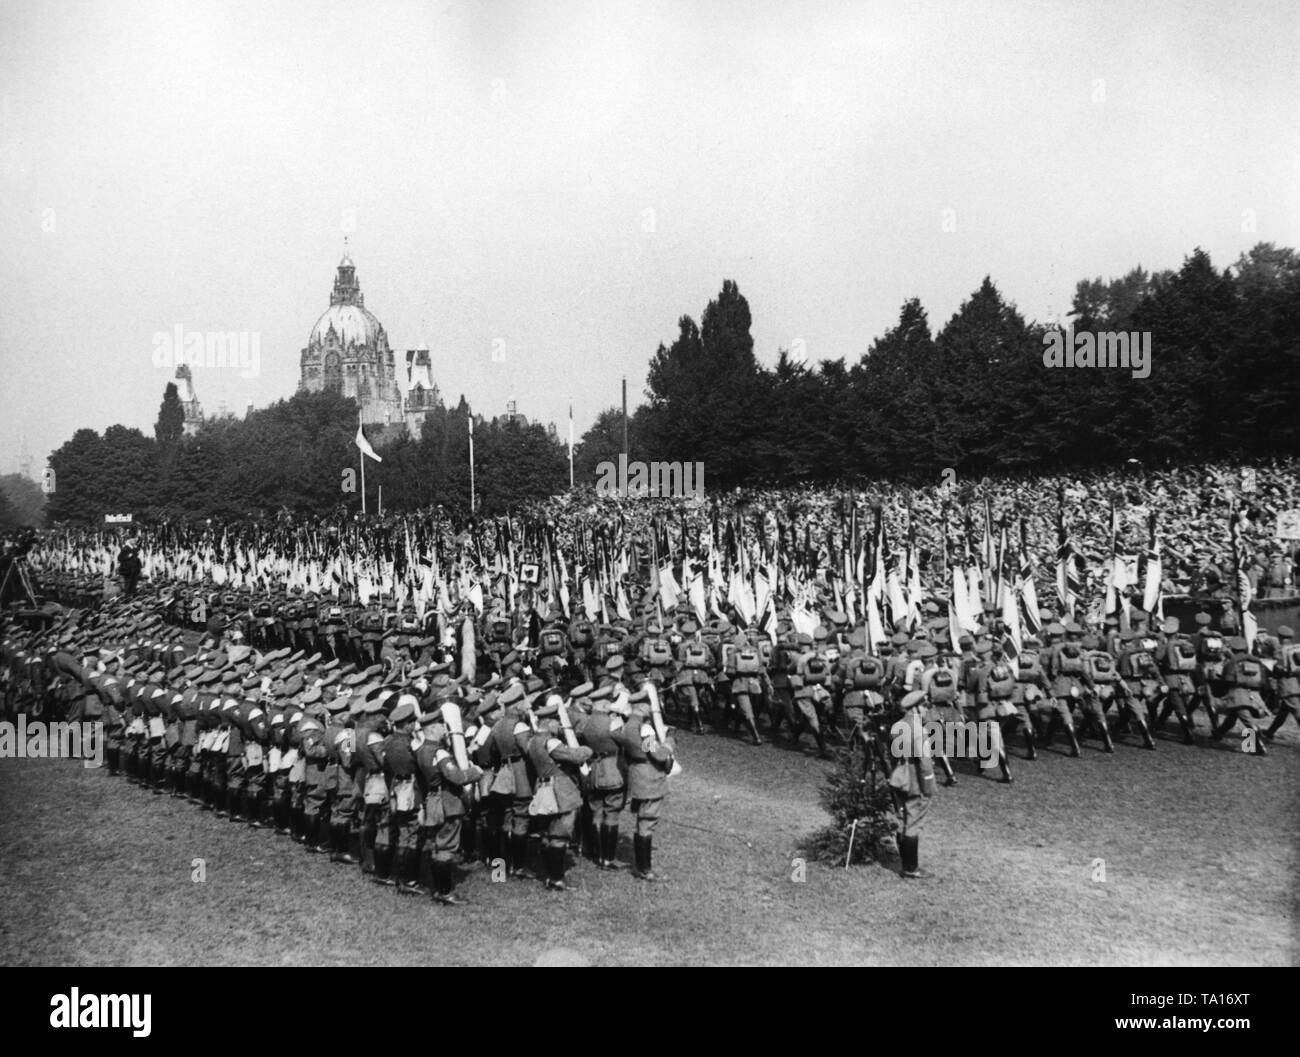 The flagbearers of the Stahlhelm are marching by SA Stabchef (chief of staff) Ernst Roehm (on the right), at a Reich leadership meeting at the Maschsee in Hanover. On the left, a brass band. In the background, the New Town Hall. Stock Photo